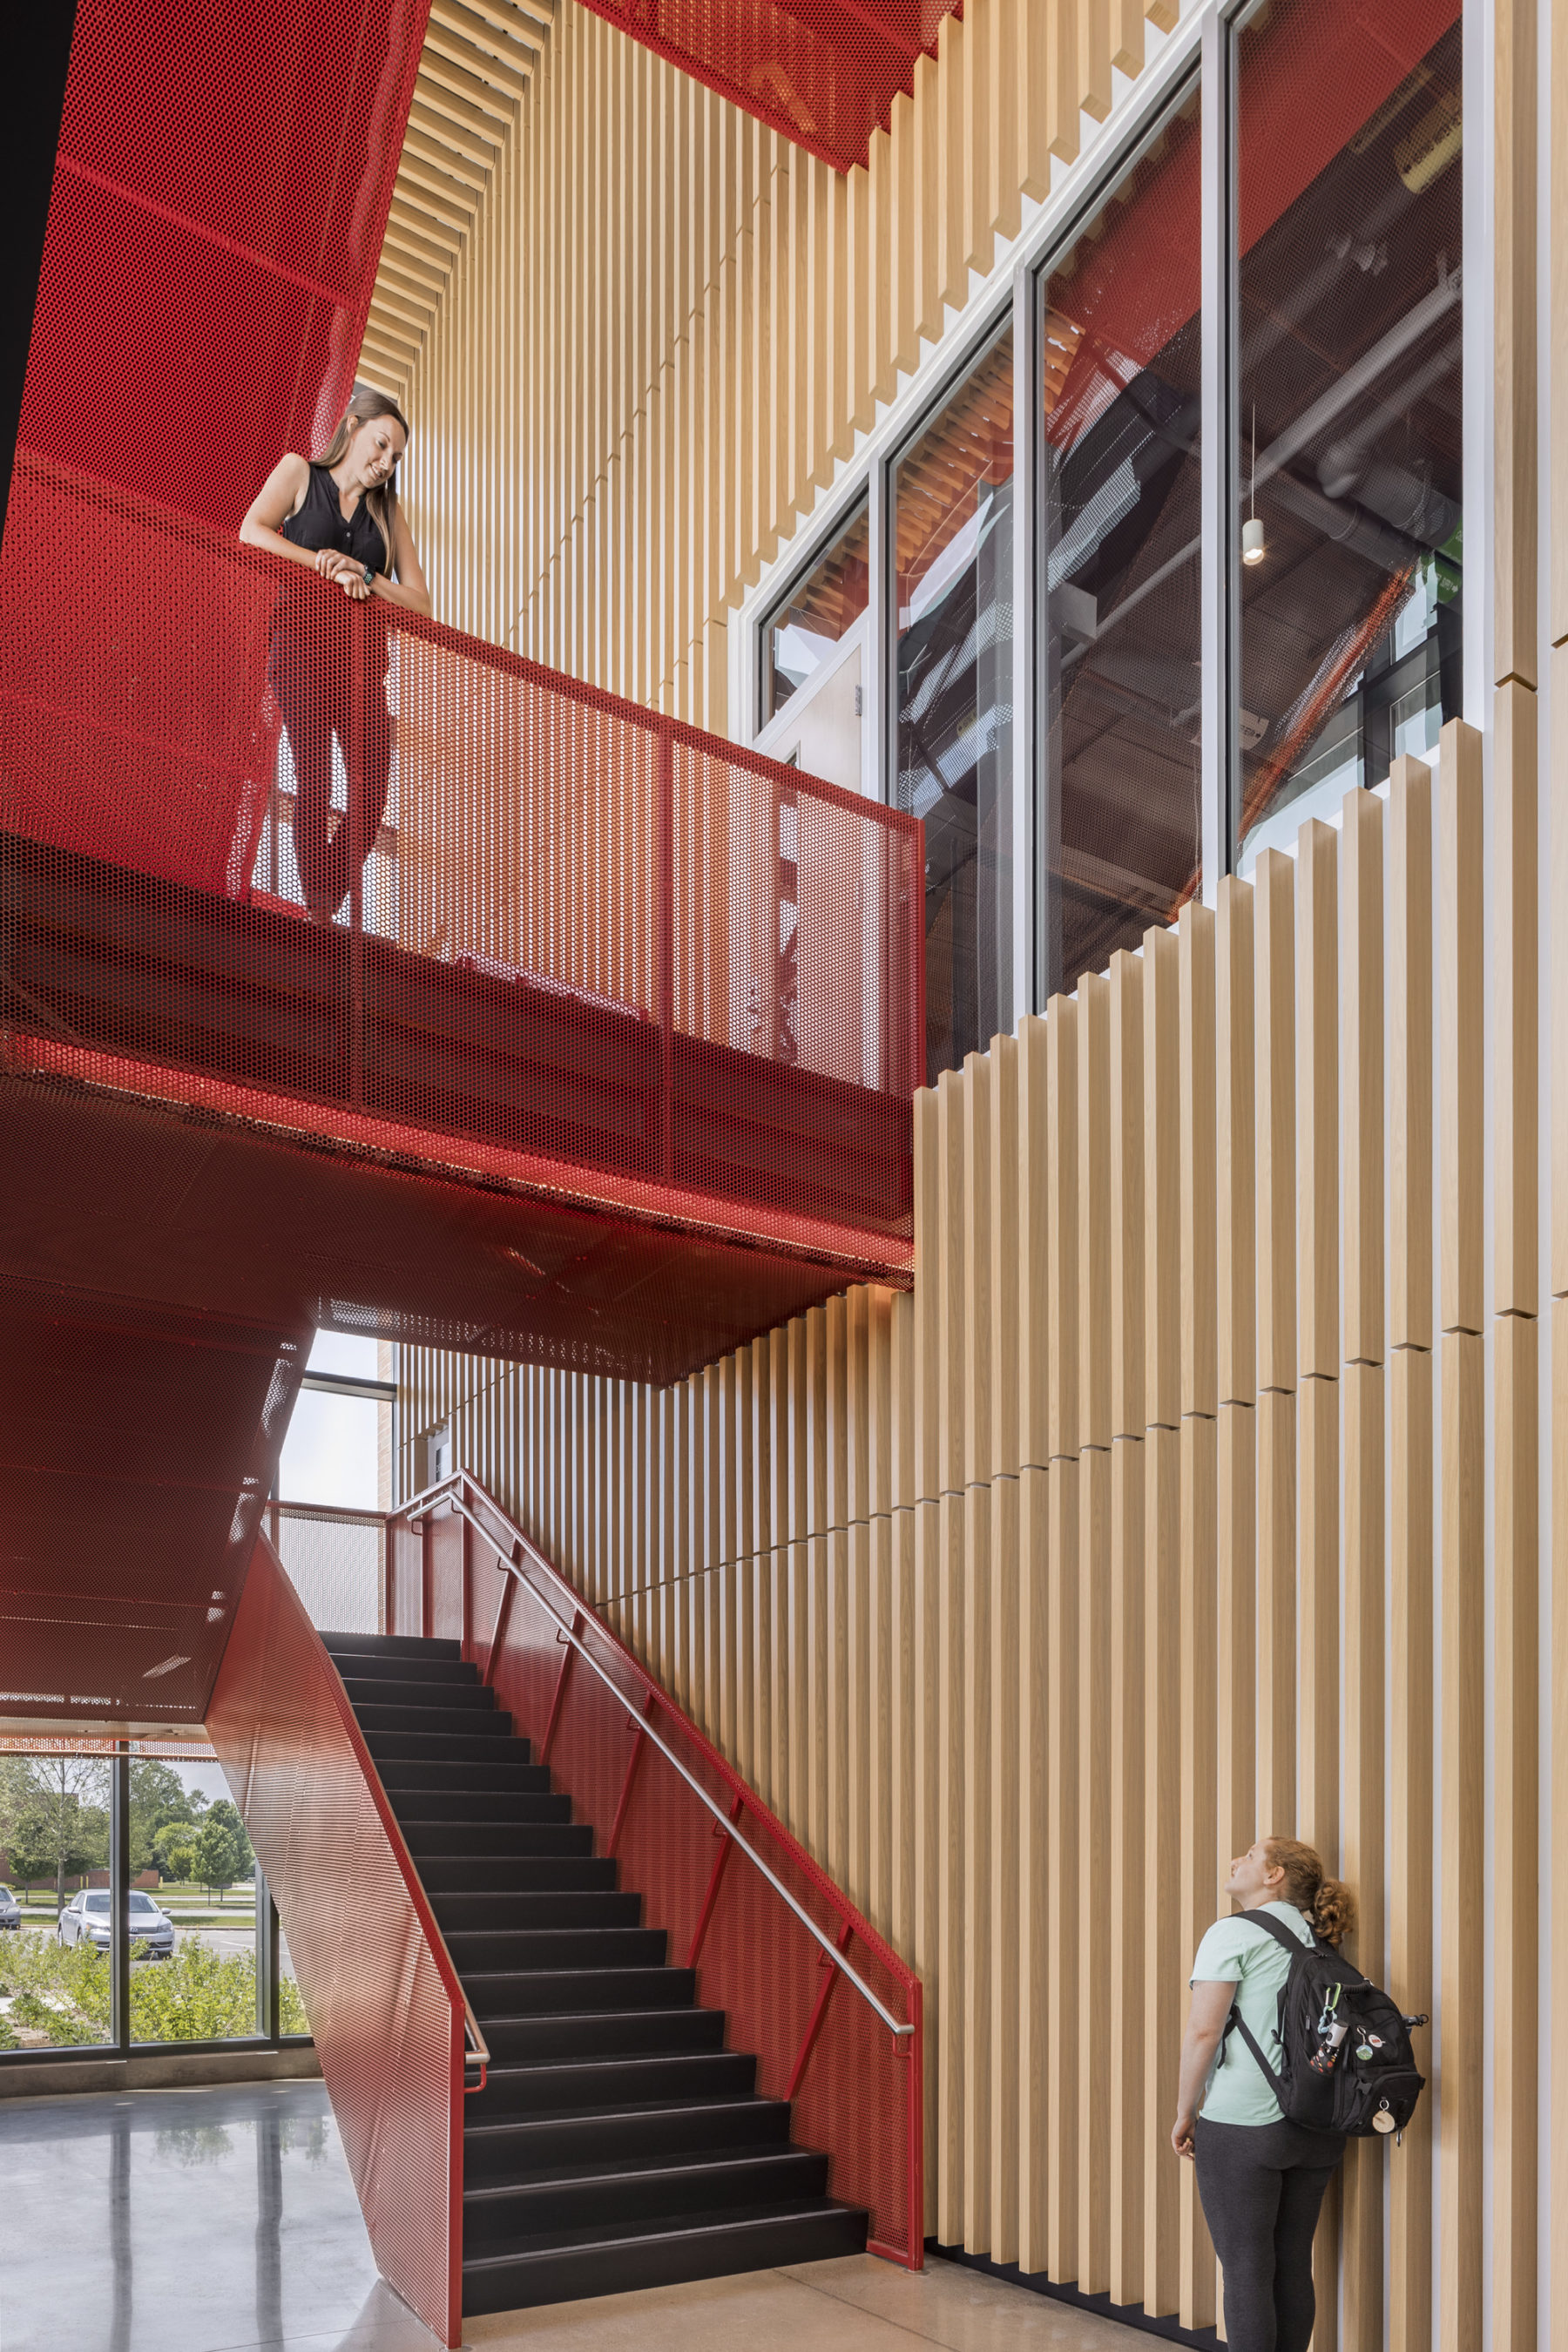 interior photo of red feature stair. One student stands on landing talking to another a floor below.